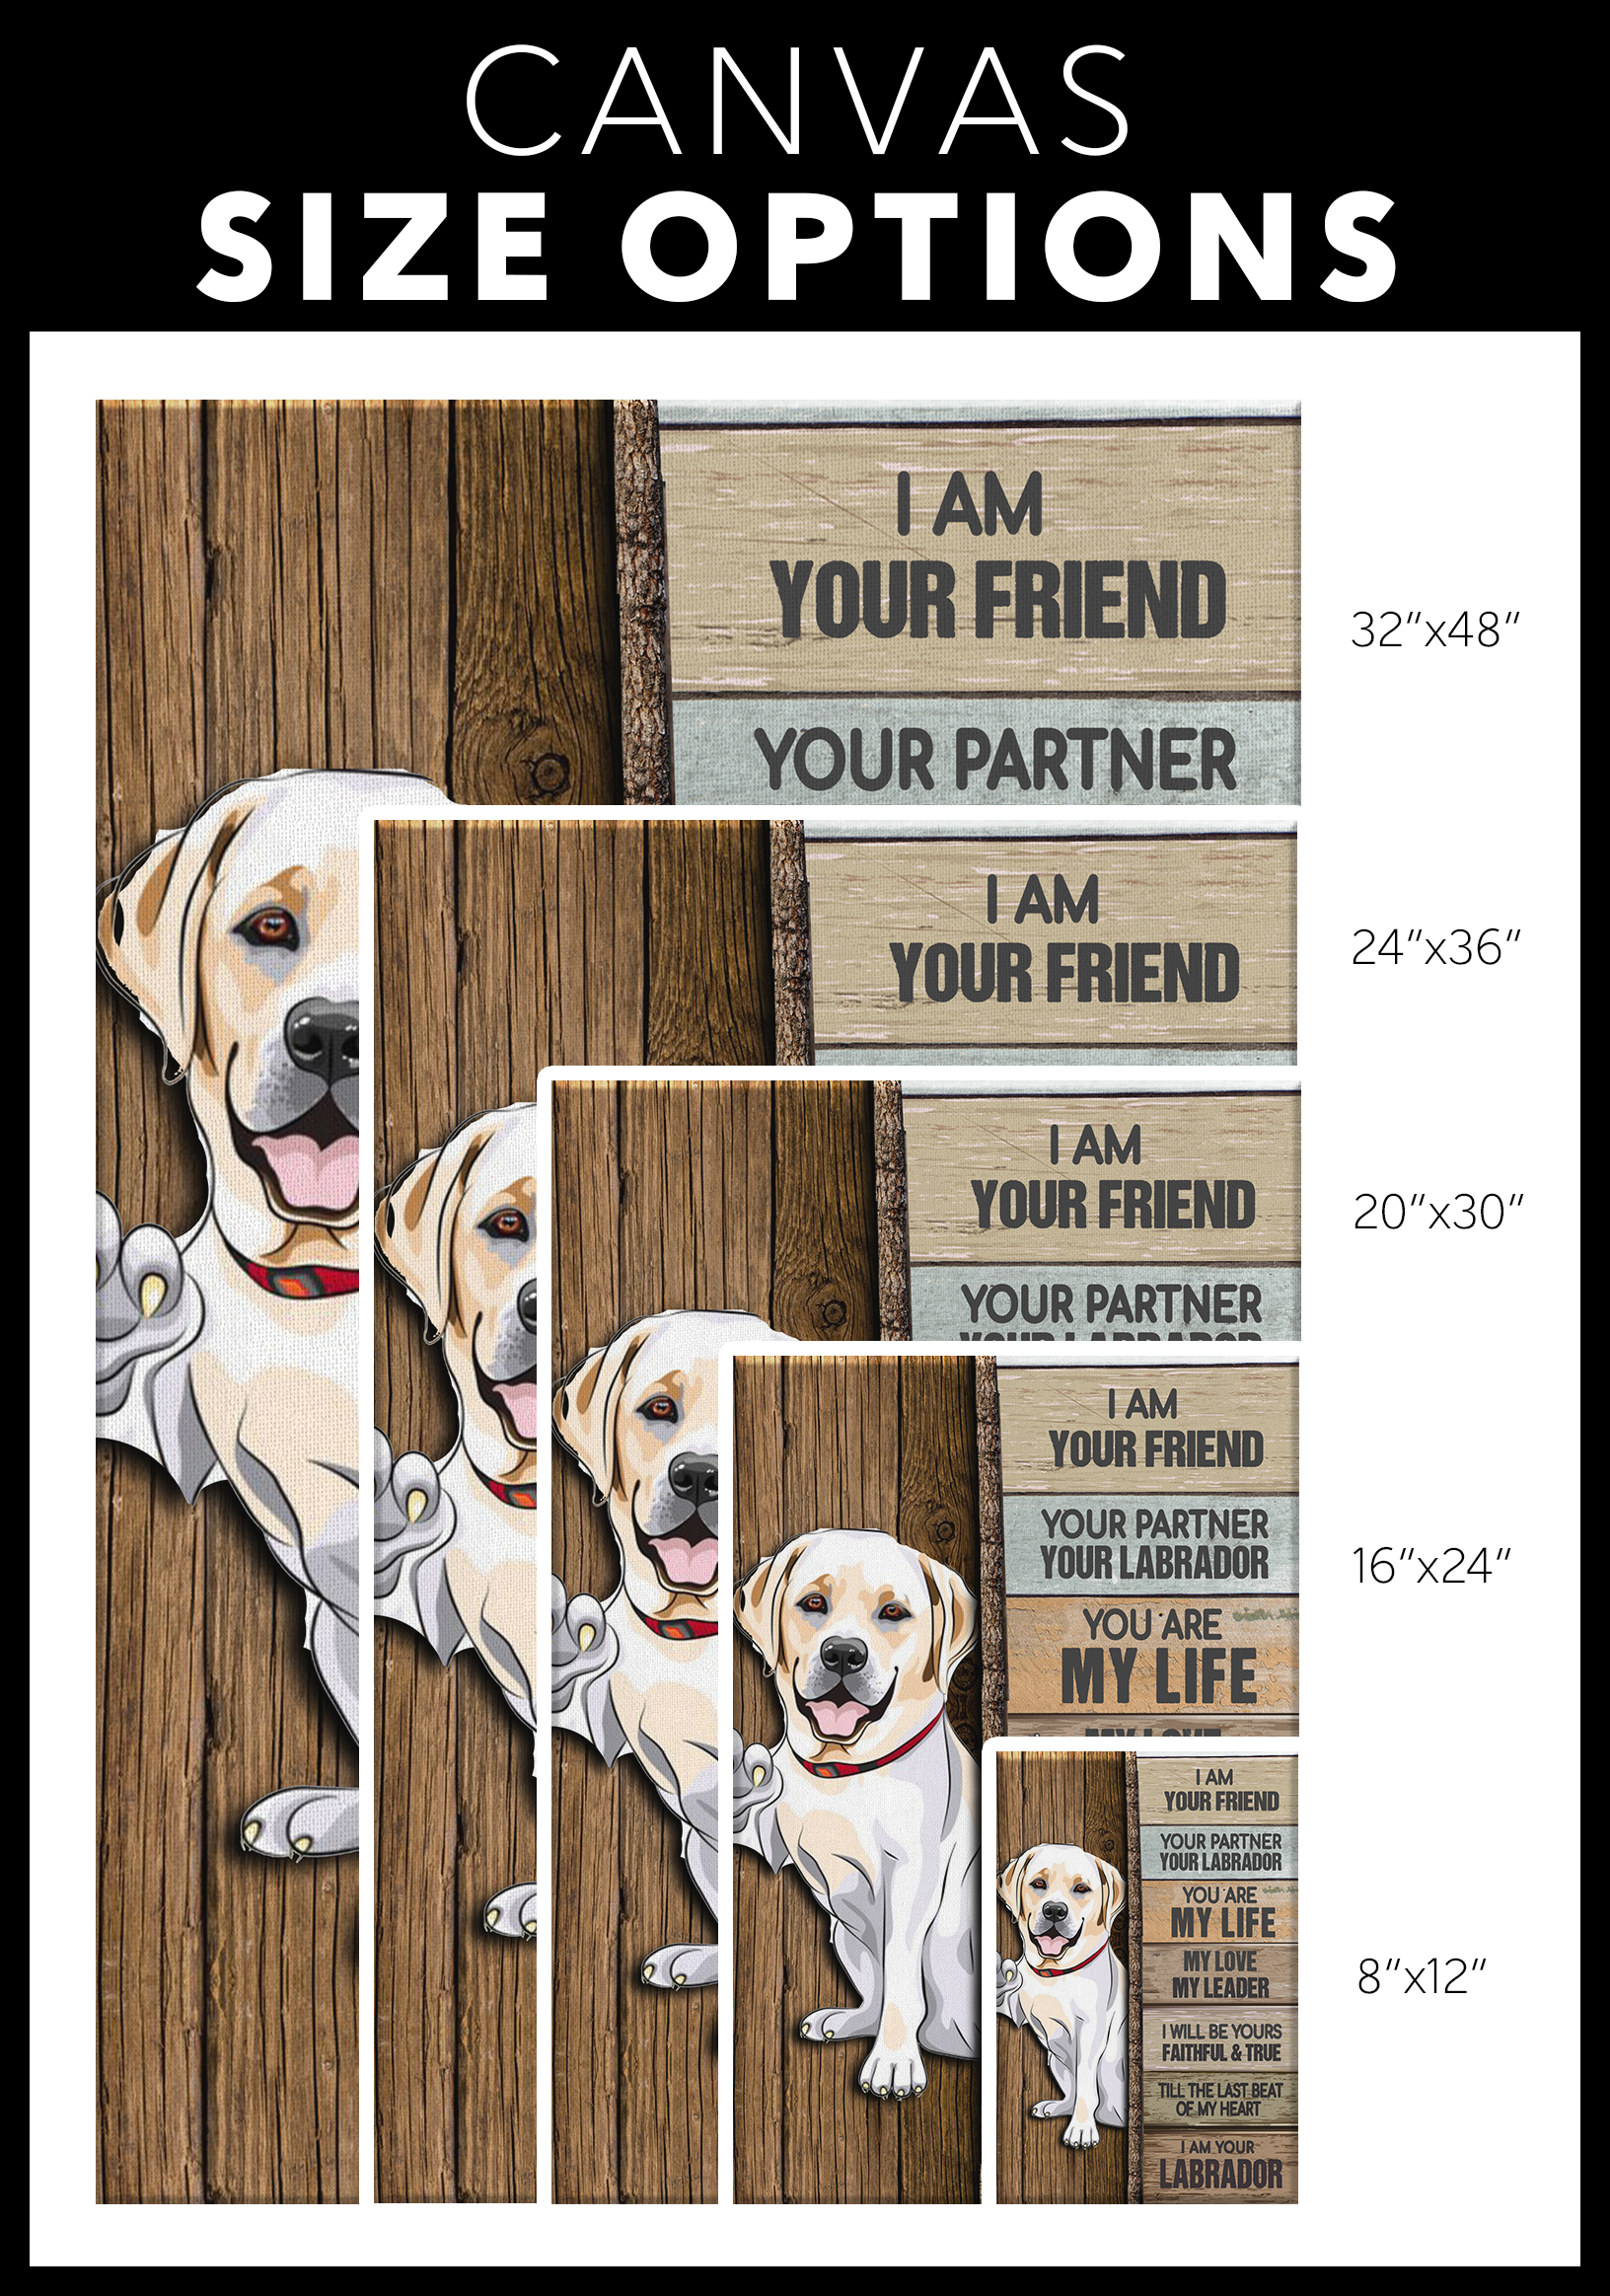 I Am Your Friend, Your Partner, Your Dog - Custom Wall Art